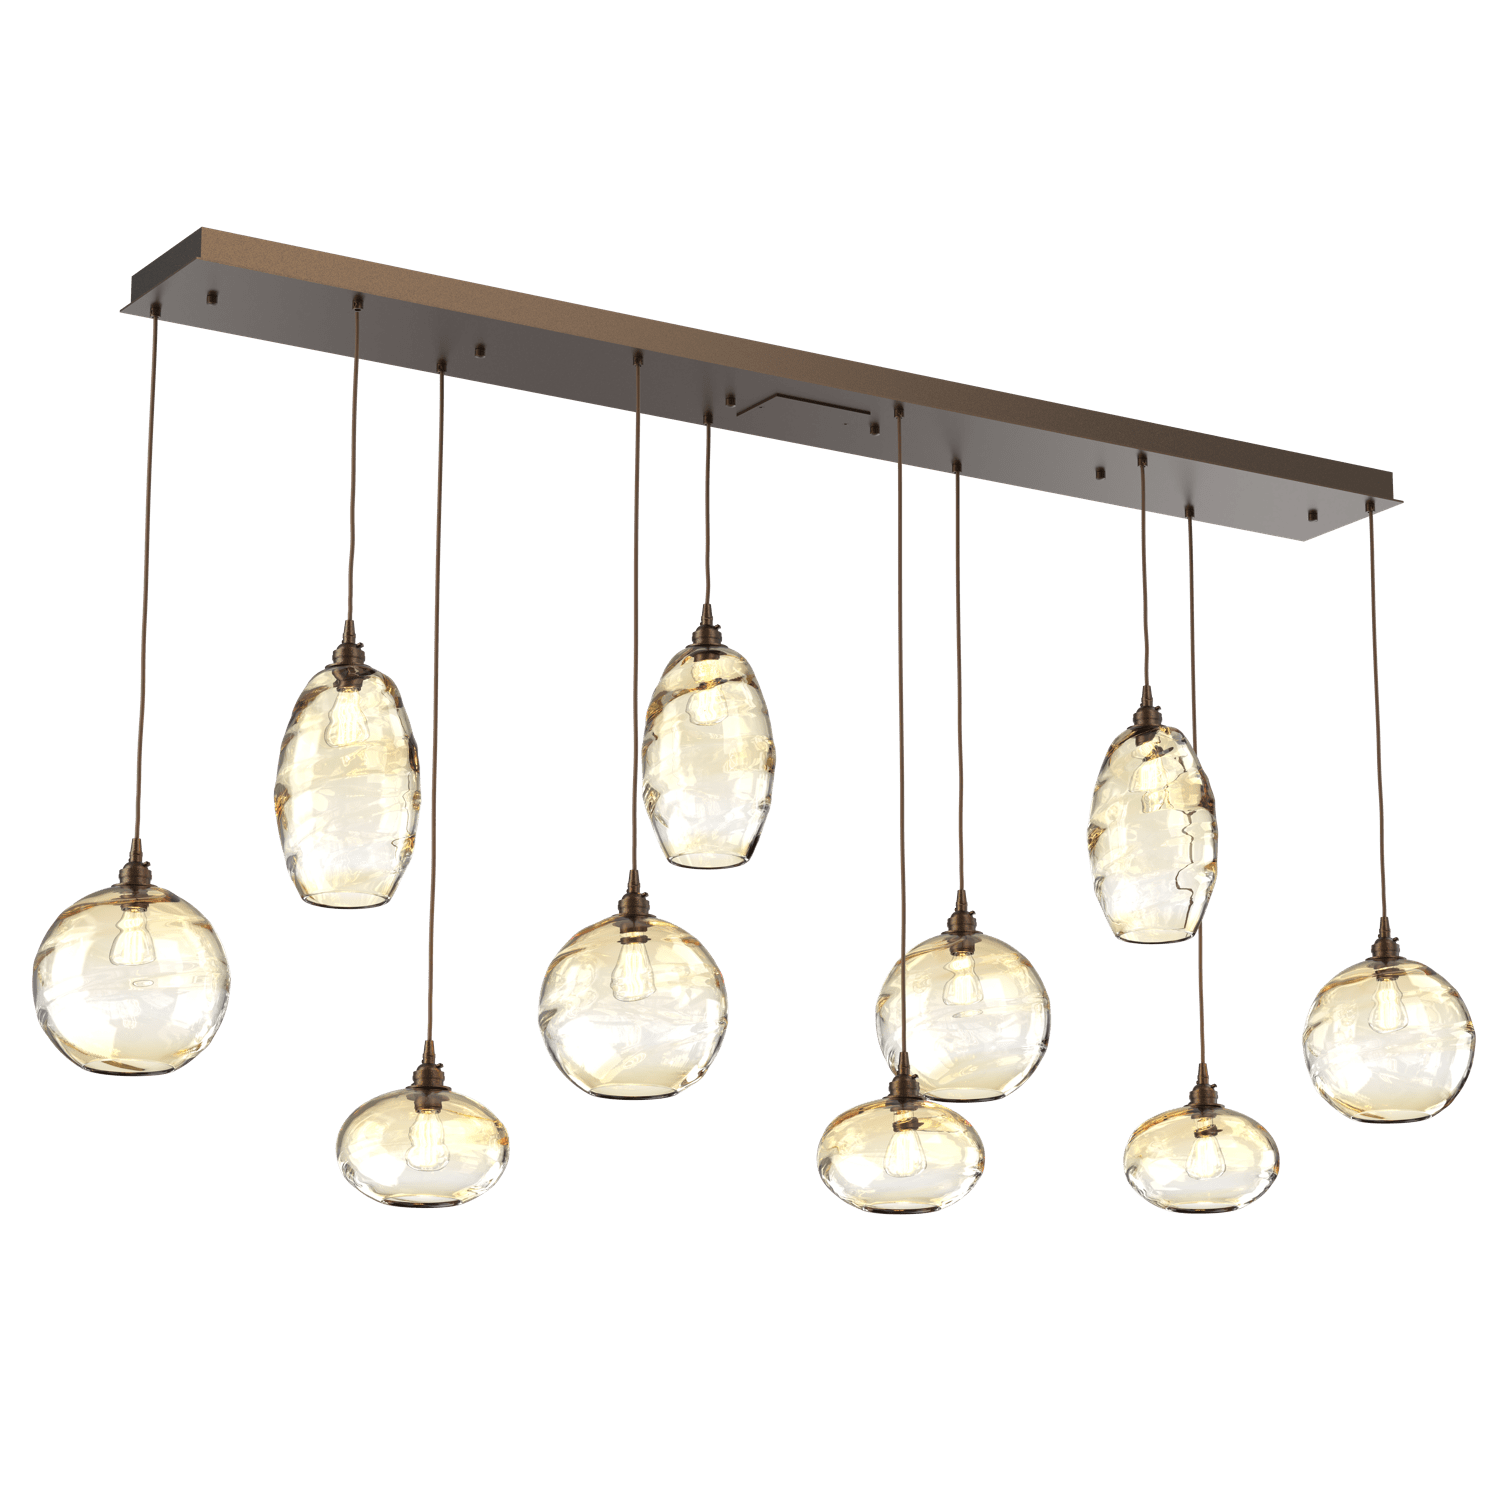 PLB0048-10-FB-OA-Hammerton-Studio-Optic-Blown-Glass-Misto-10-light-linear-pendant-chandelier-with-flat-bronze-finish-and-optic-amber-blown-glass-shades-and-incandescent-lamping